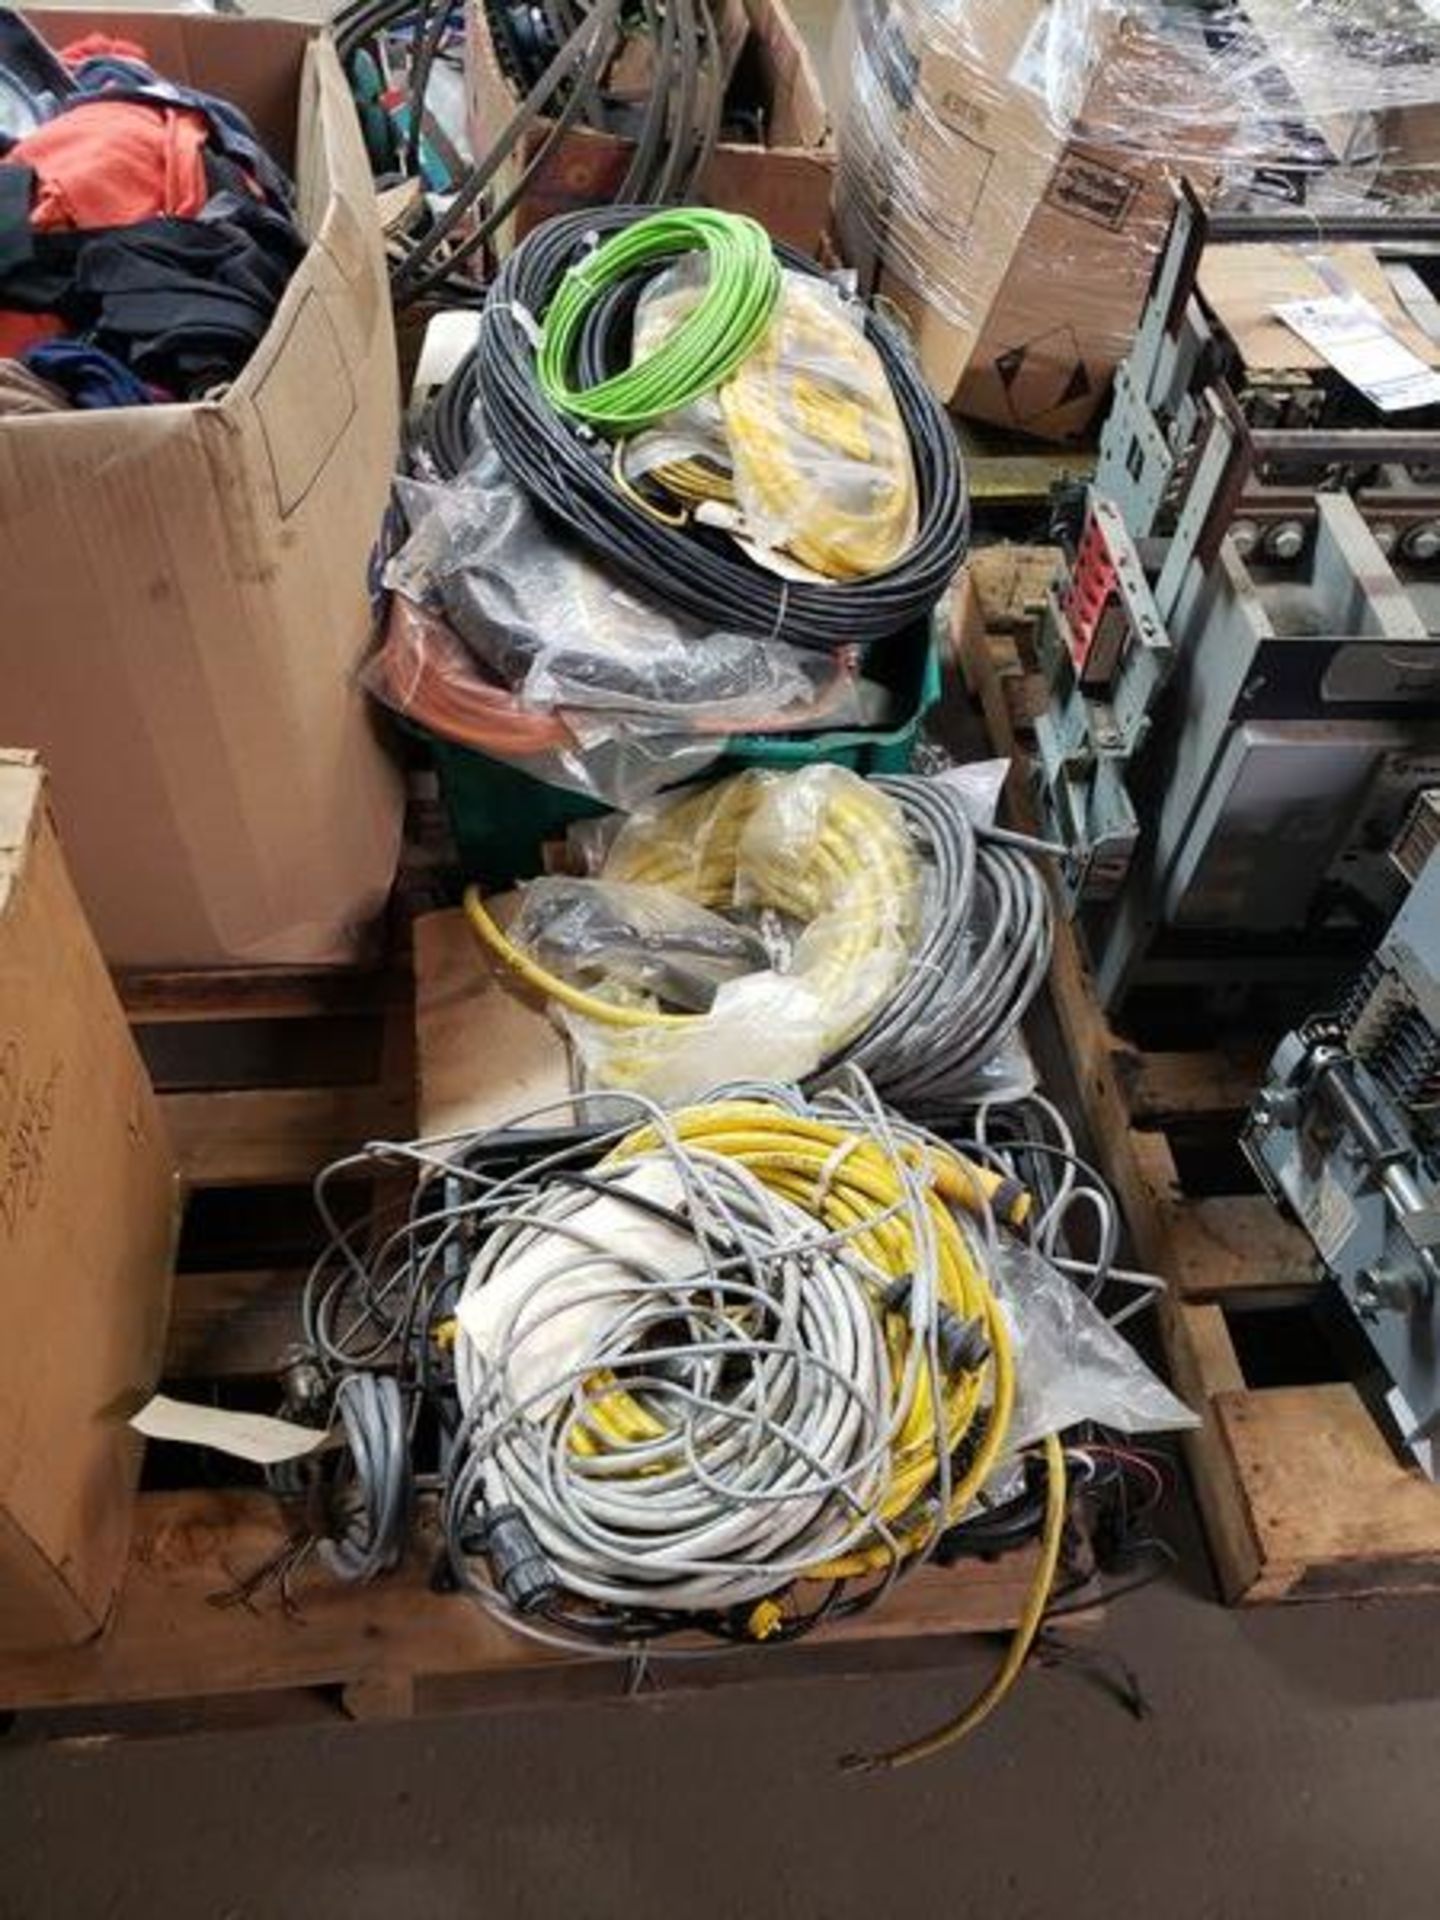 LOT OF CORDS AND CABLE